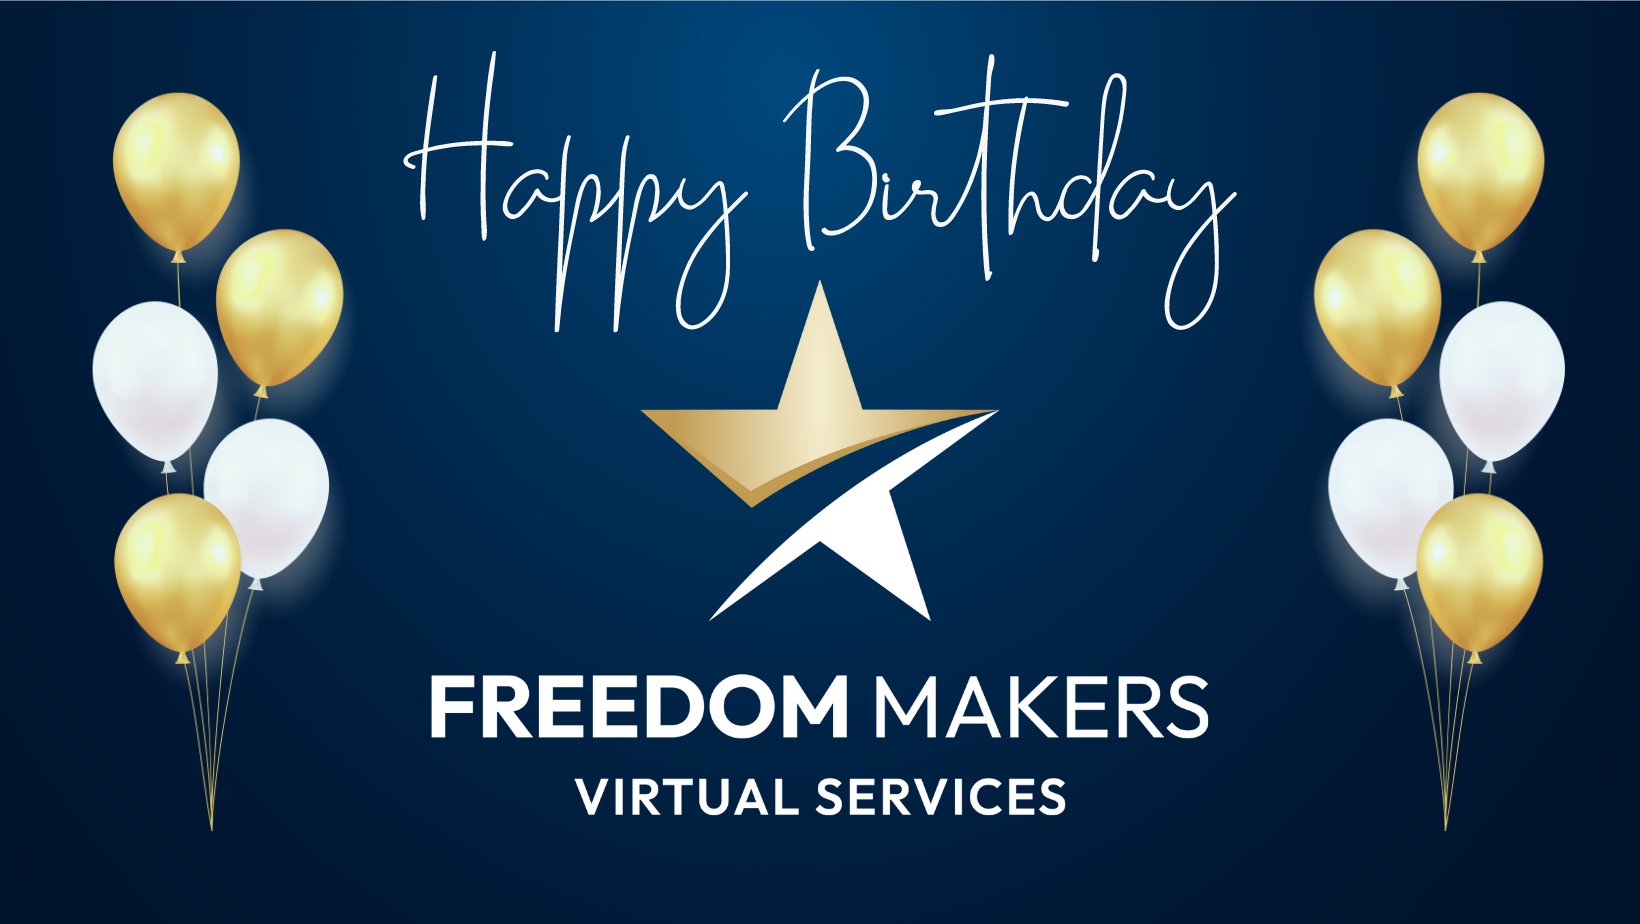 A happy birthday banner for freedom makers virtual services